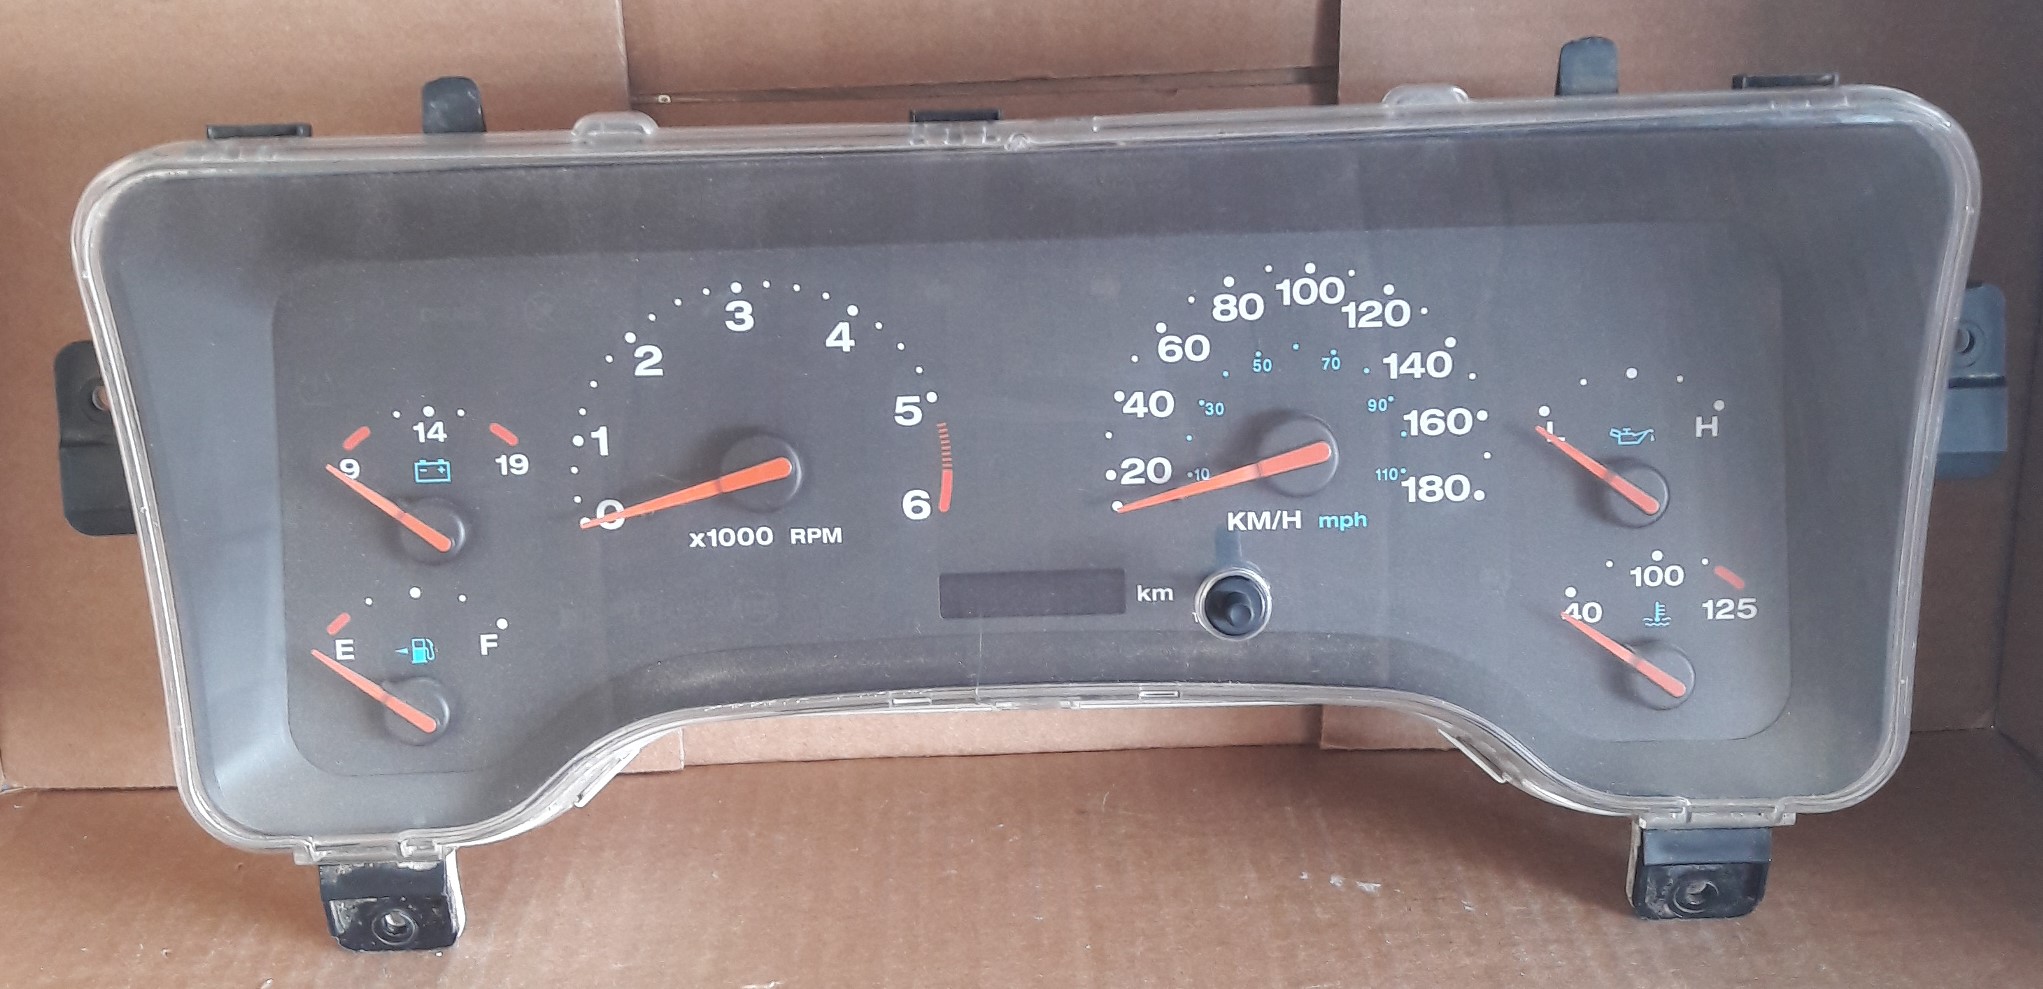 1999-2005 JEEP TJ USED DASHBOARD INSTRUMENT CLUSTER FOR SALE (KM/H) - DASHBOARD  INSTRUMENT CLUSTER